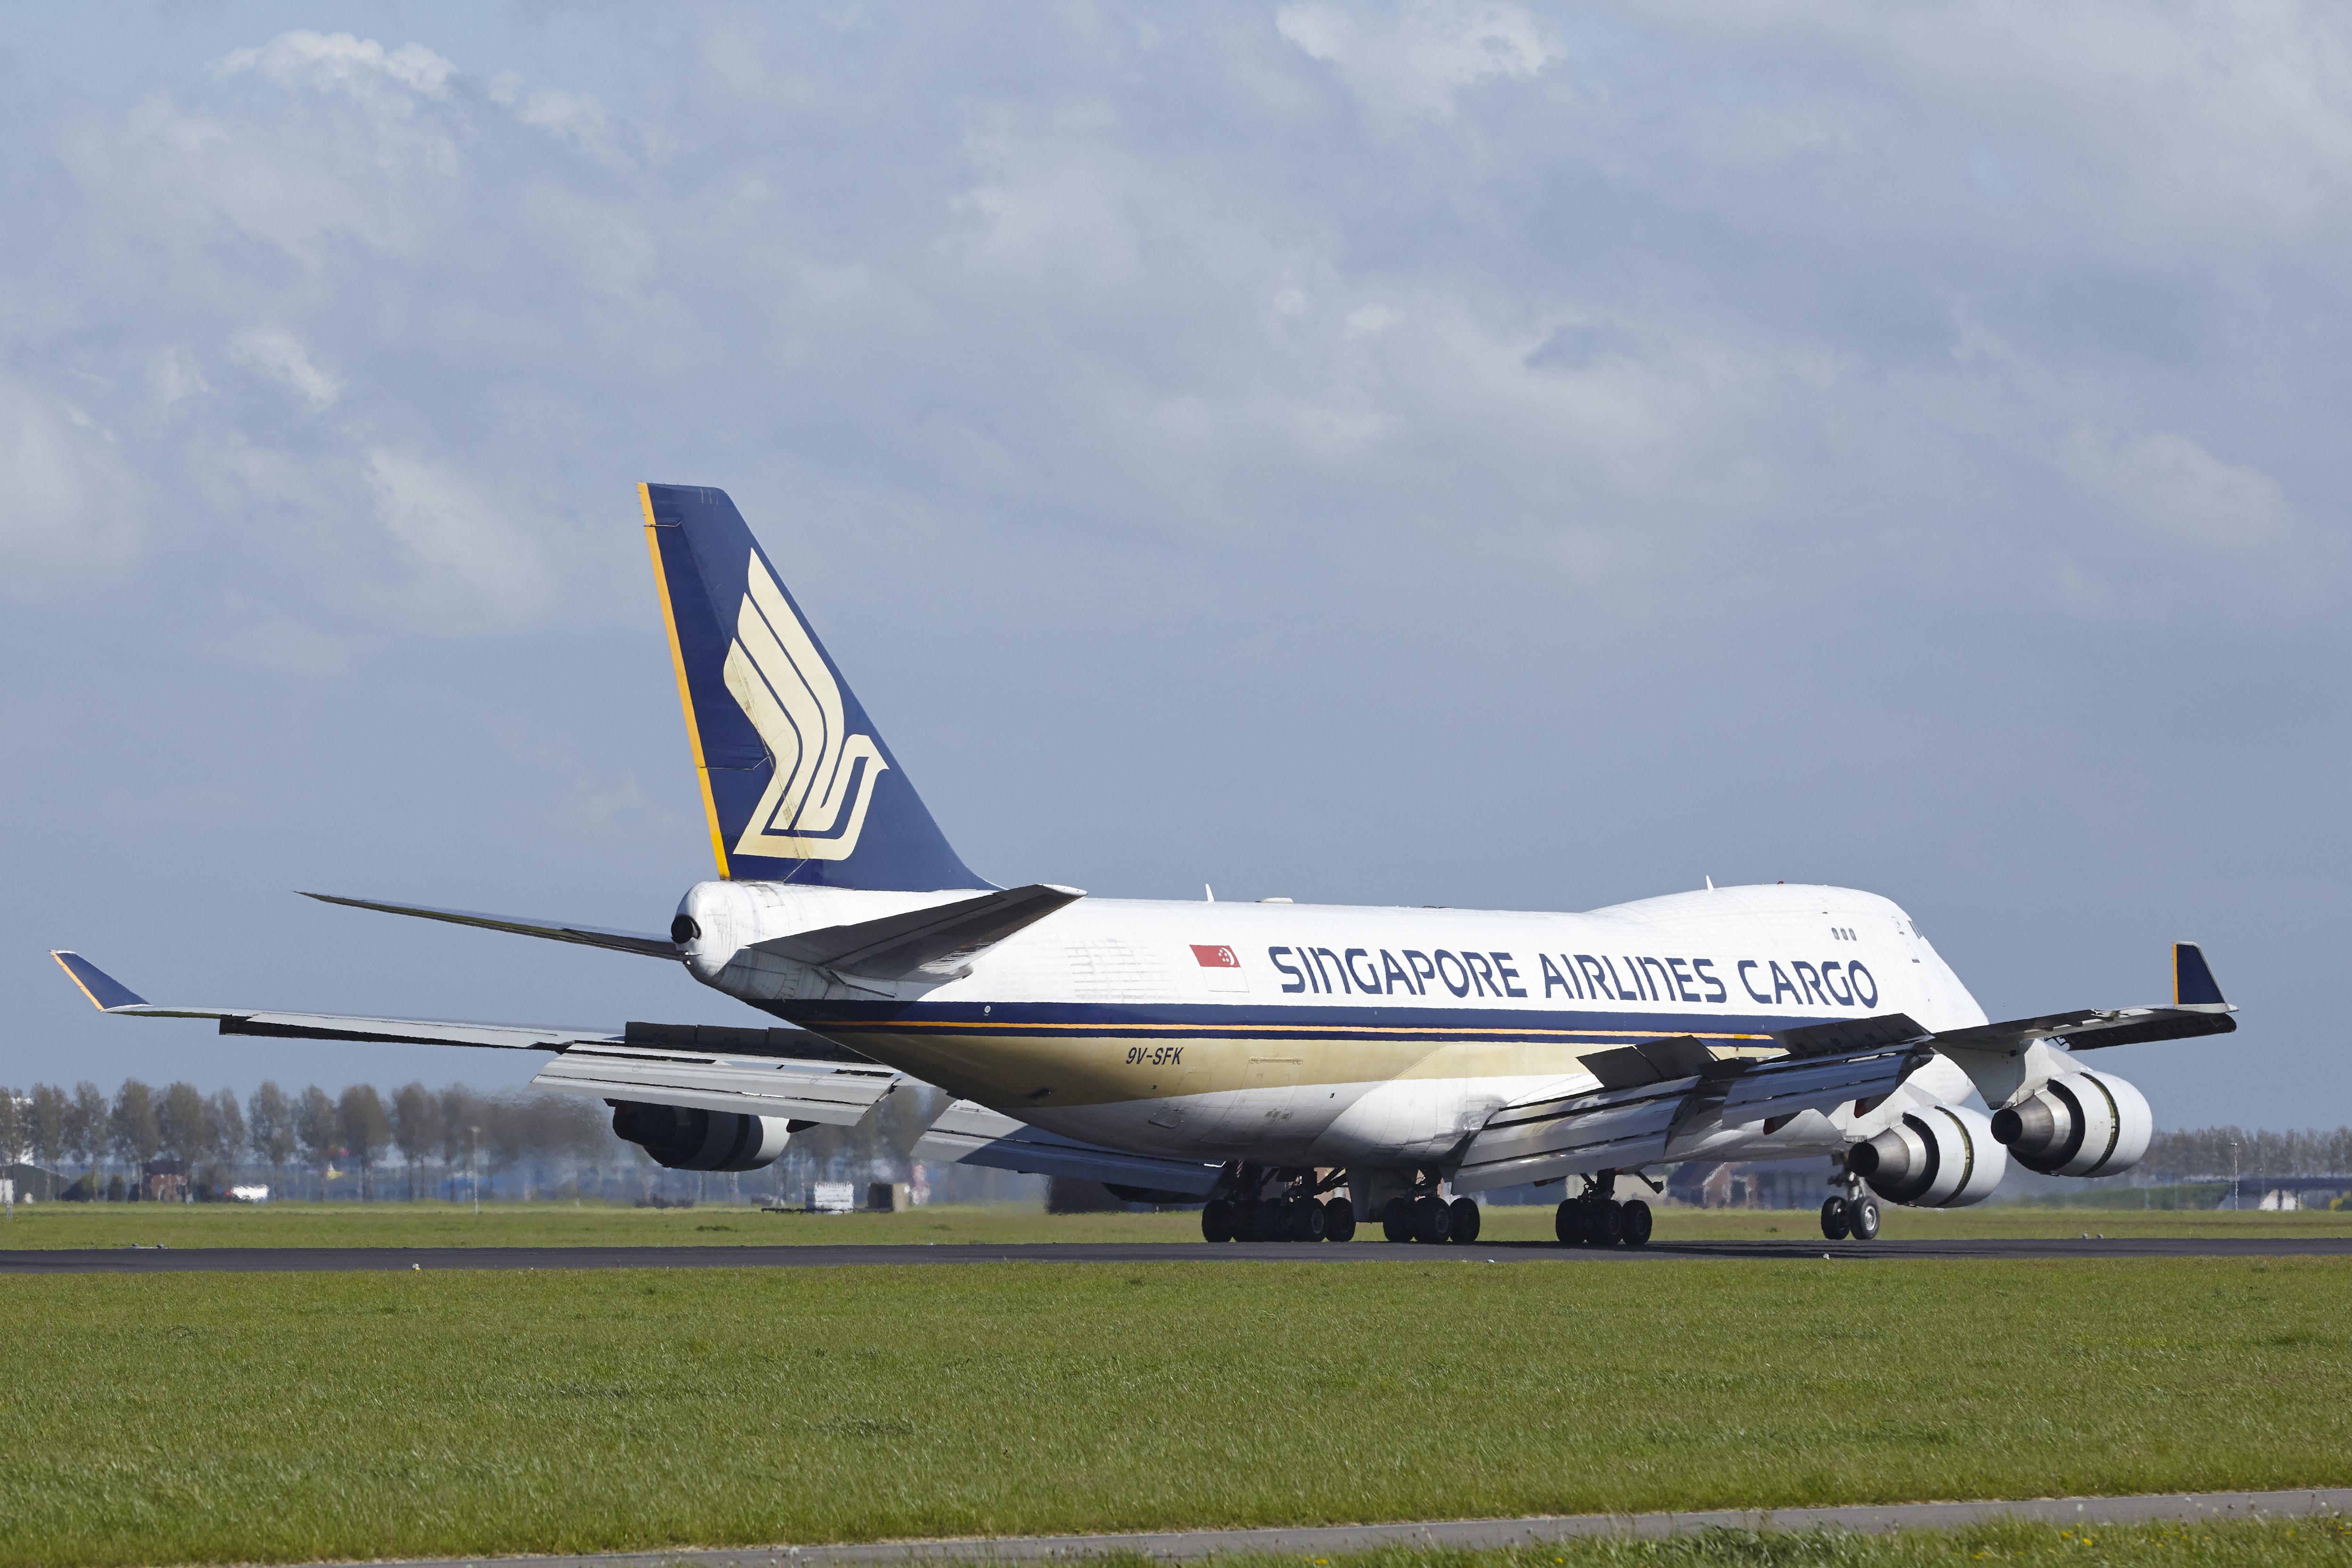 Singapore Airlines Cargo Boeing 747F at Amsterdam Airport Schiphol